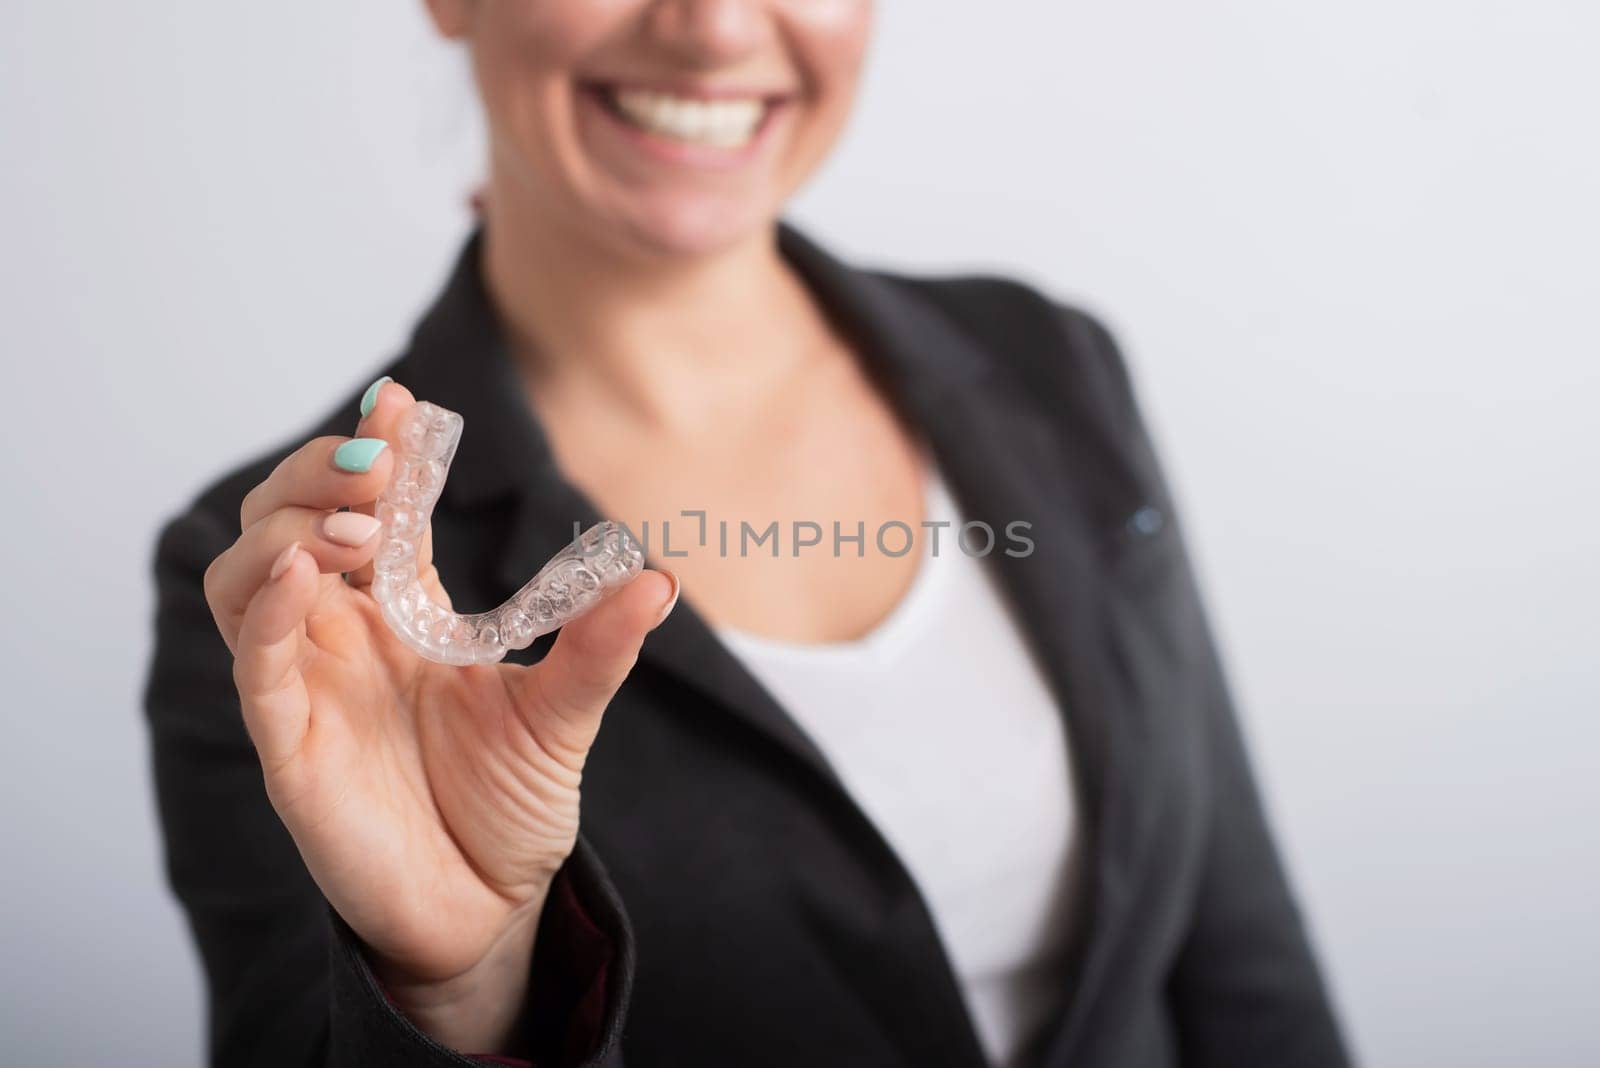 The woman is smiling and holding a transparent plastic aligner for bite correction by mrwed54